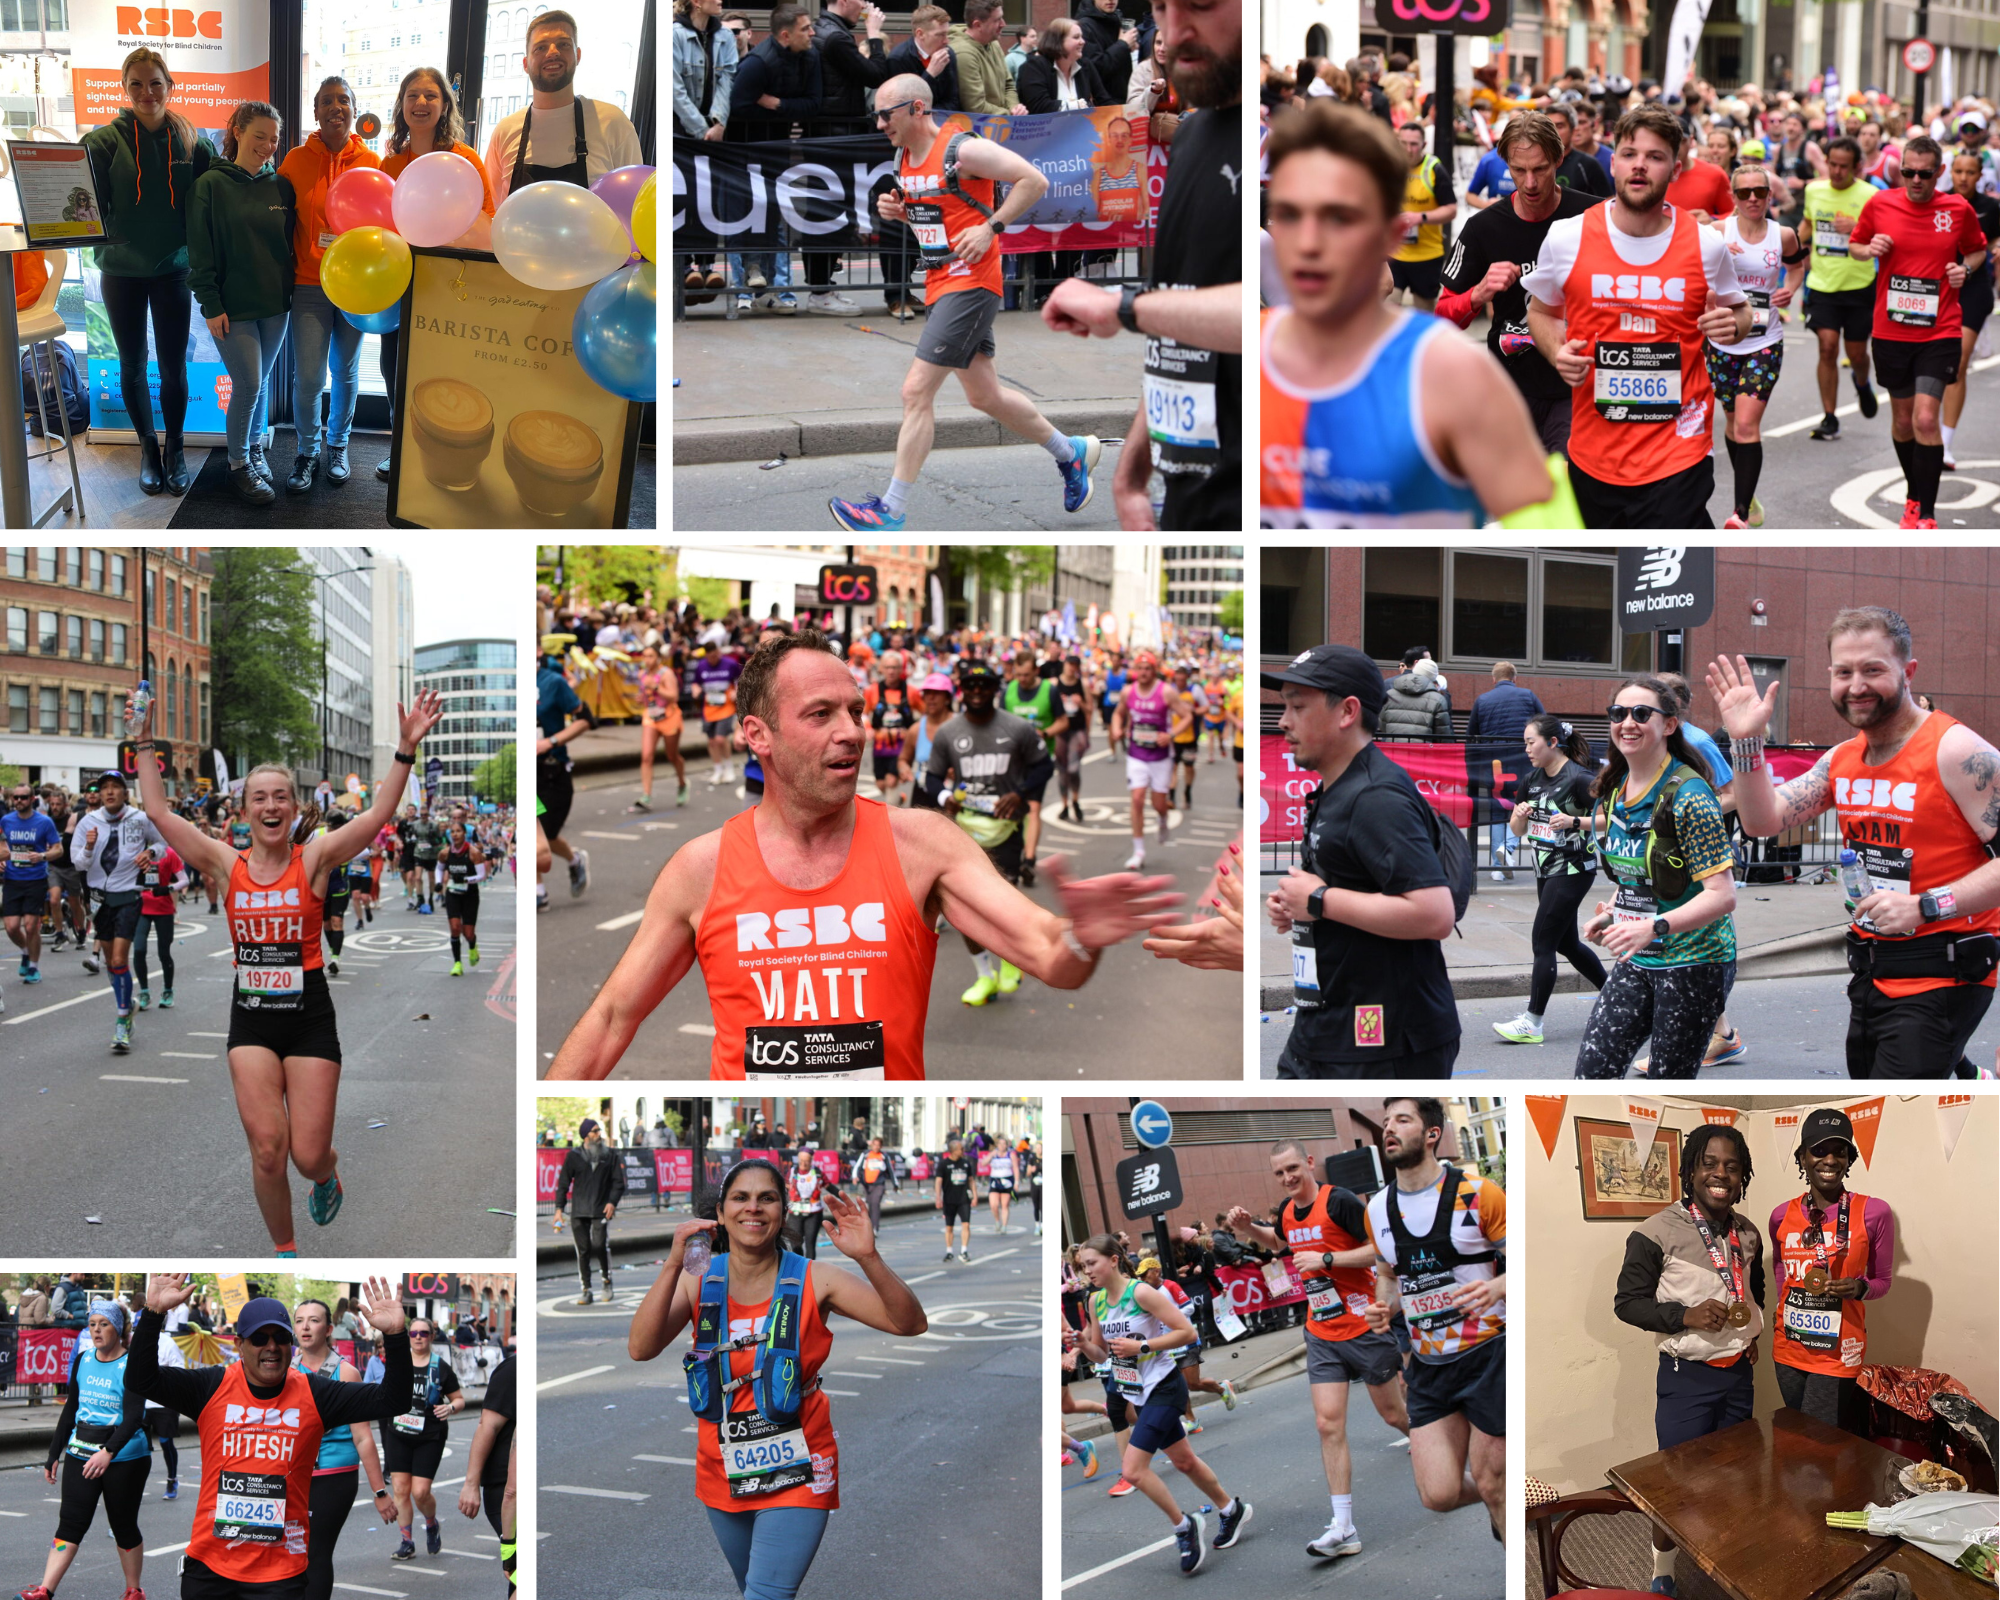 A photo album of 10 images from the London Marathon. The photos are a group shot of volunteers in a cafe with cafe owner standing by a sign with balloons, runners on the street of London, and runners posing with their medals.